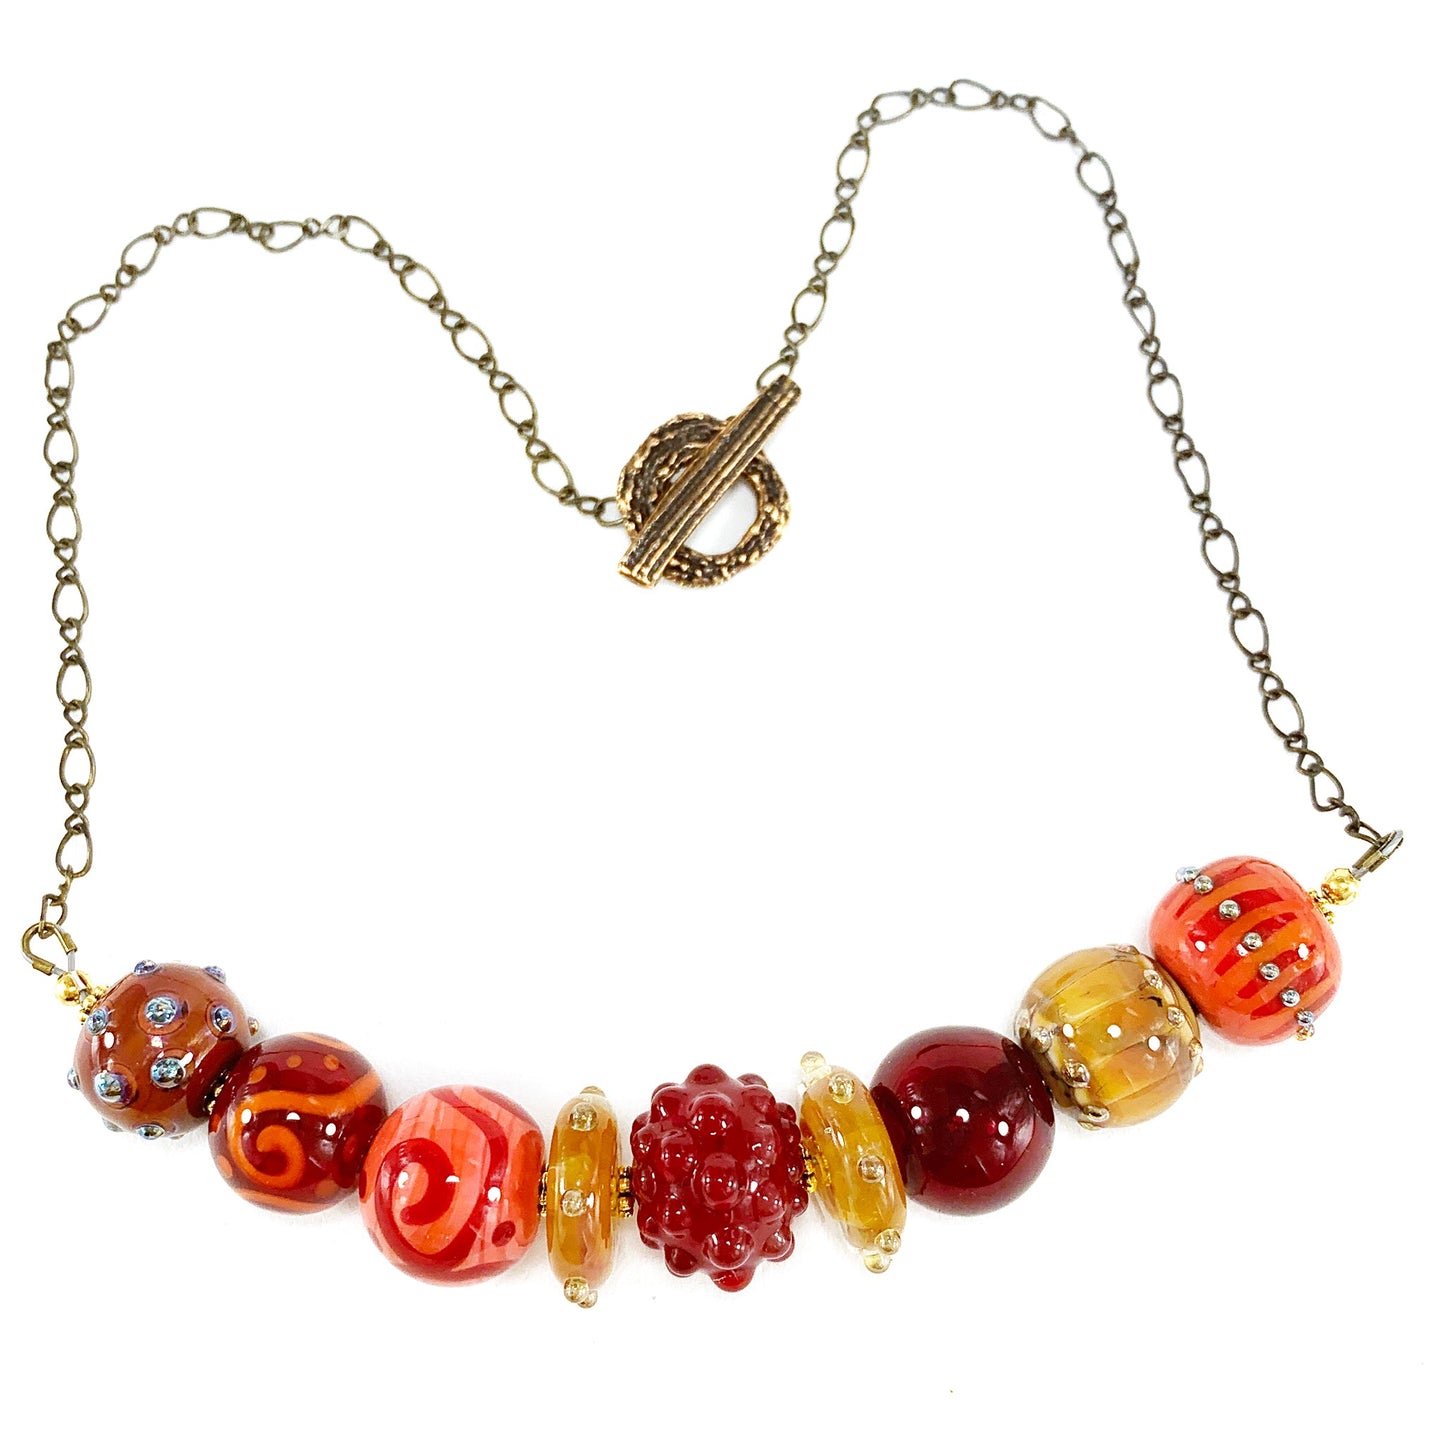 Little Bit of "Summer" Boho Bead Collector's Necklace - The Glass Acorn